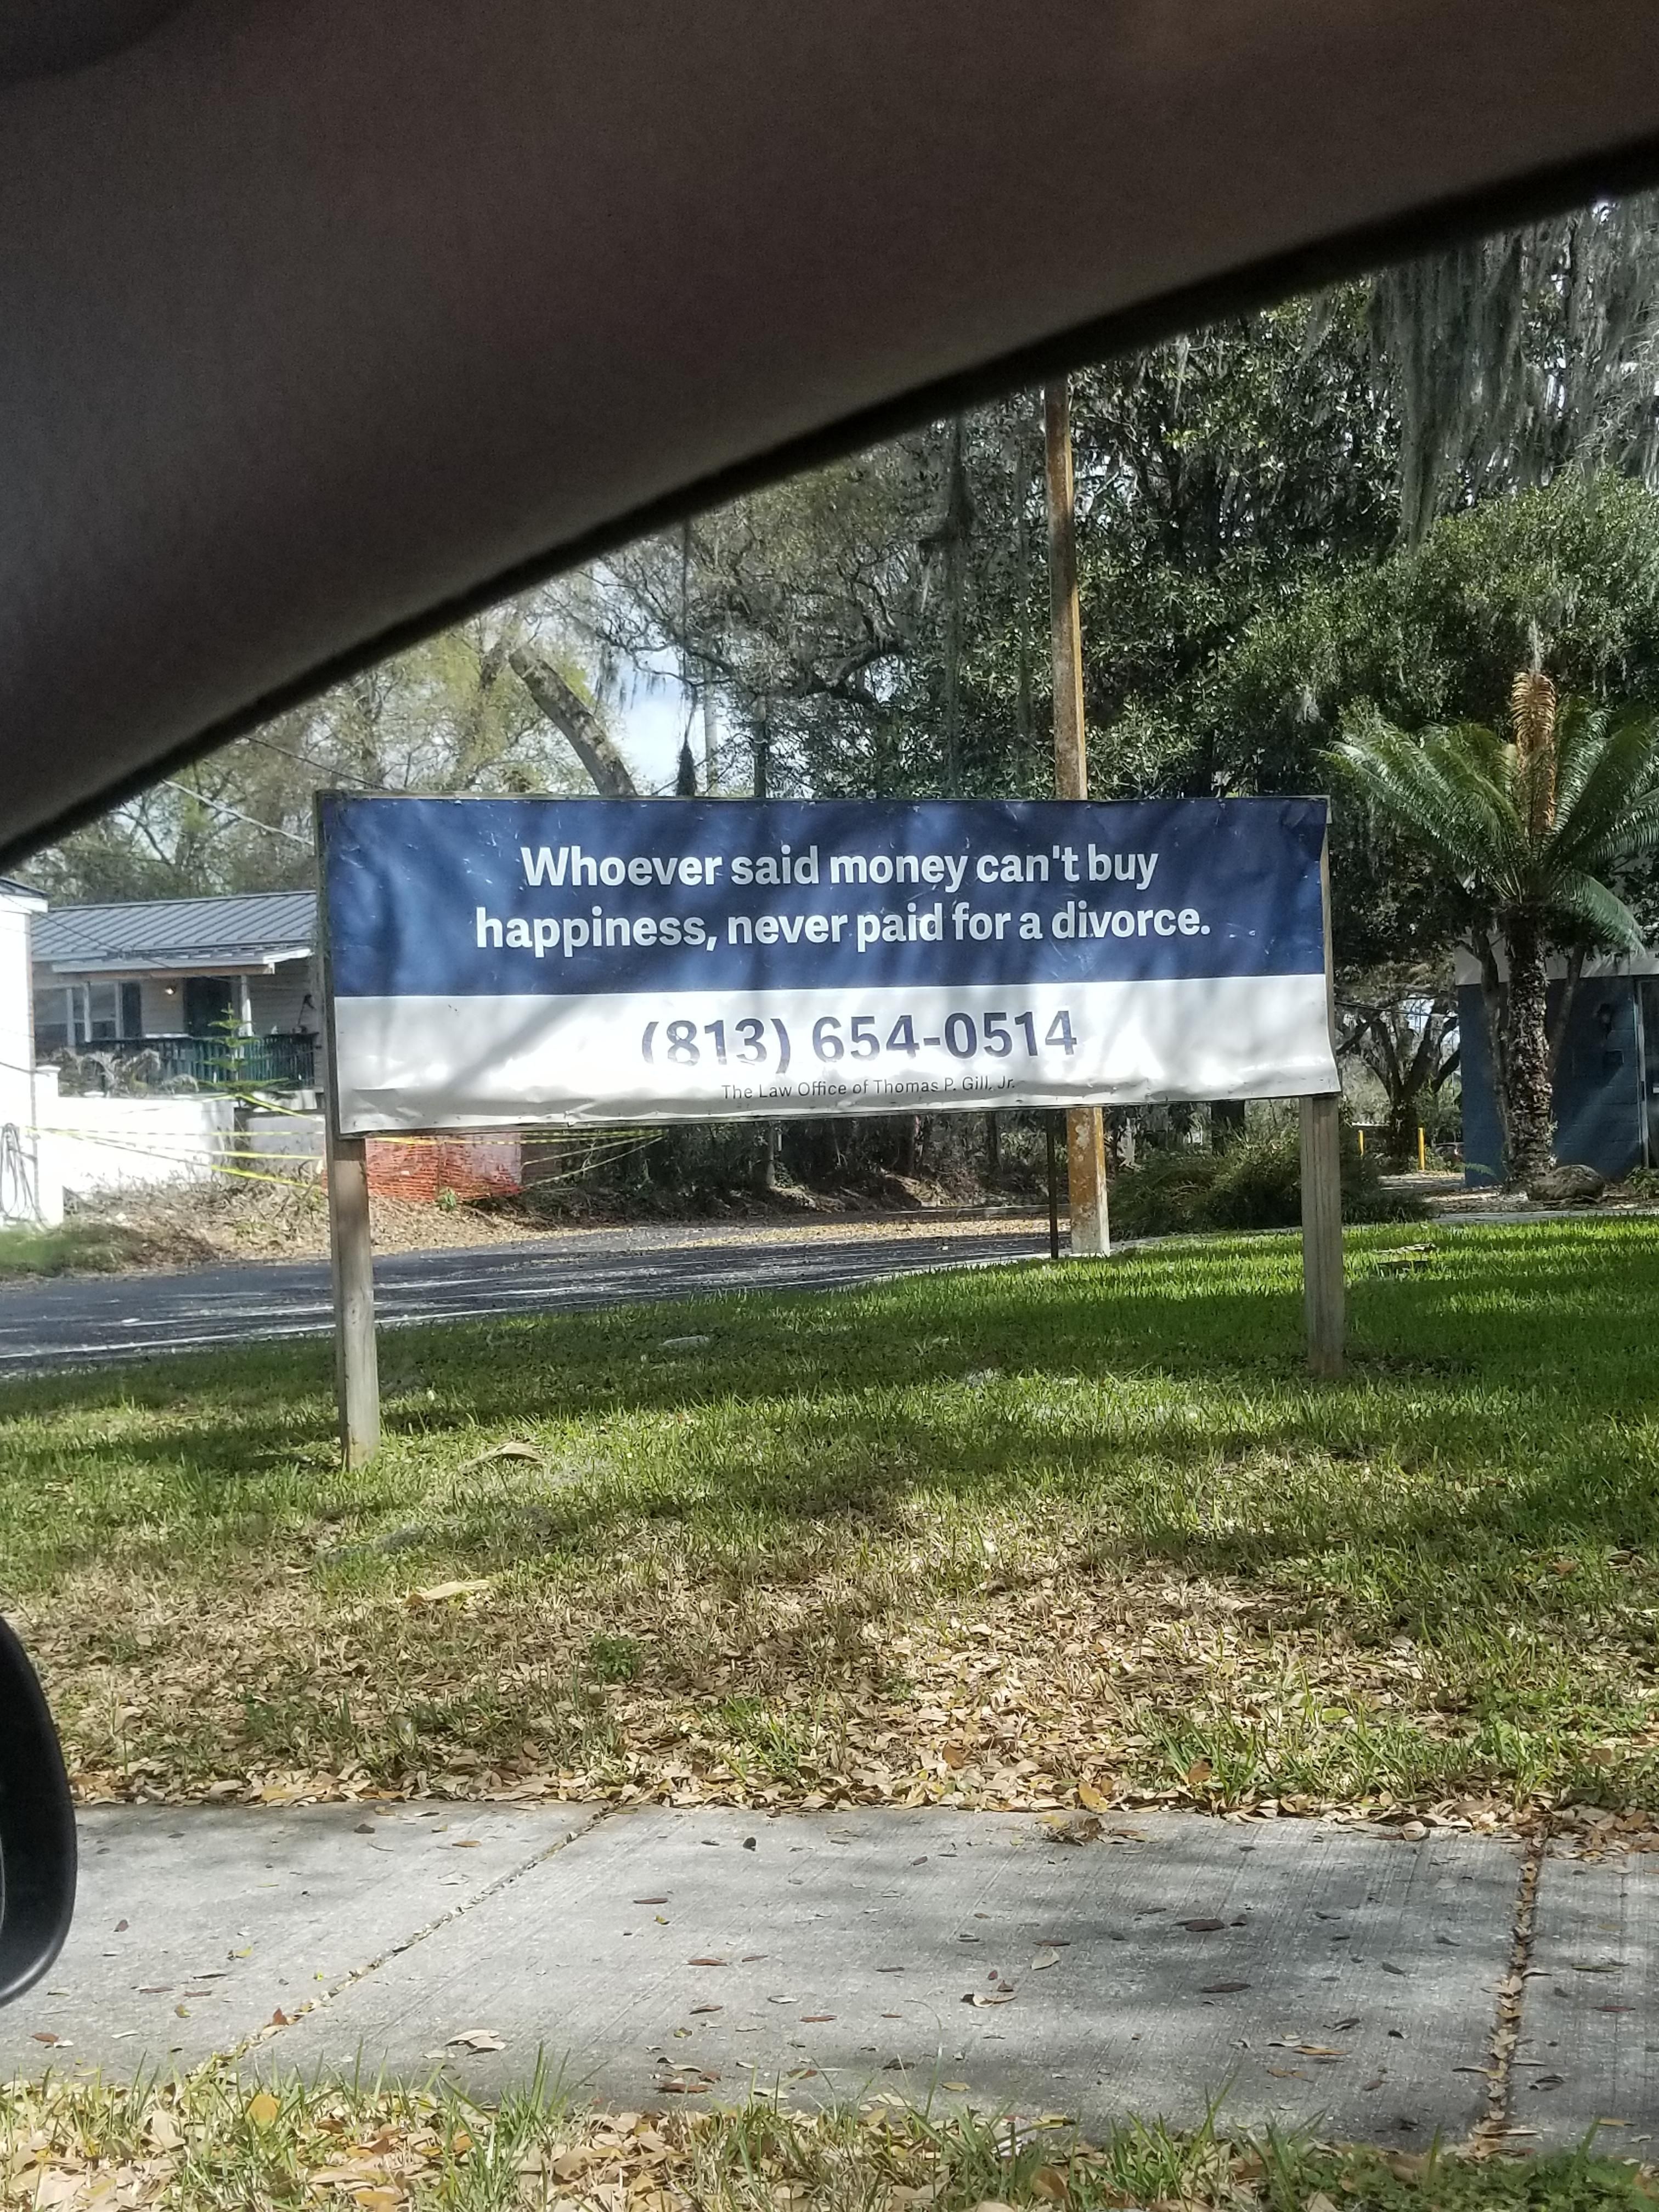 This local lawyer makes a valid point